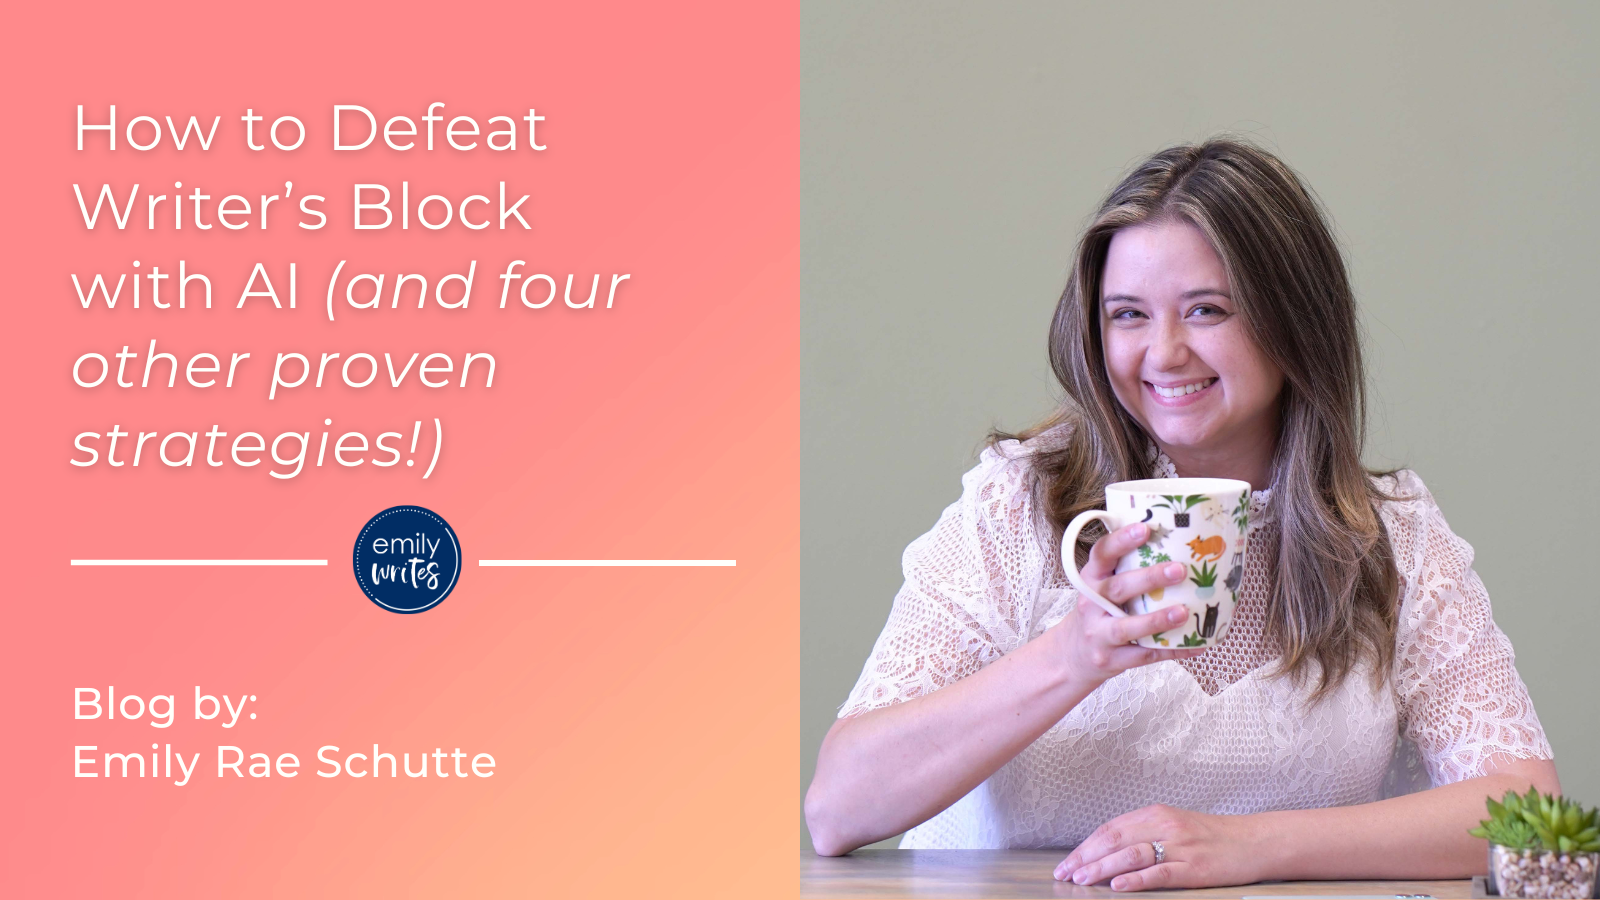 How to Defeat Writer’s Block with AI (and four other proven strategies!)